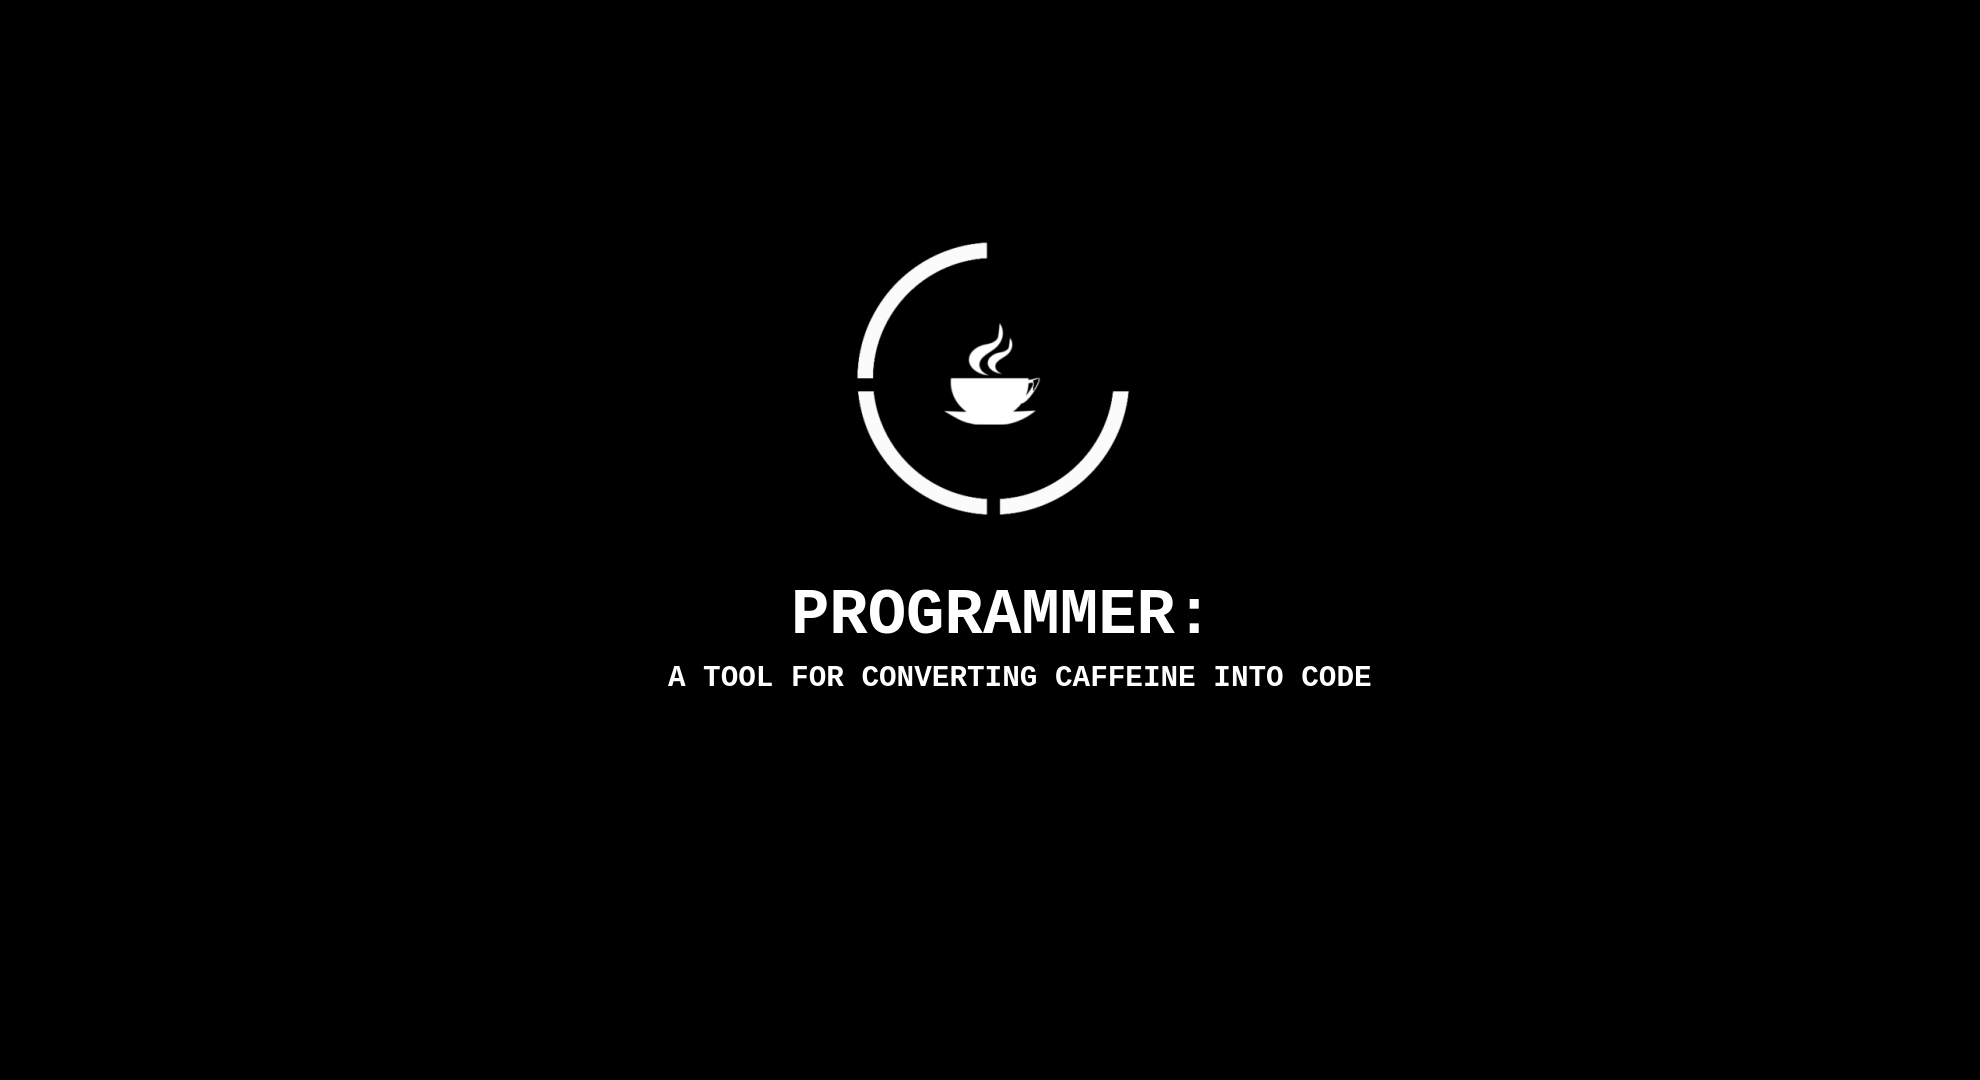 Wallpaper For Programmers On